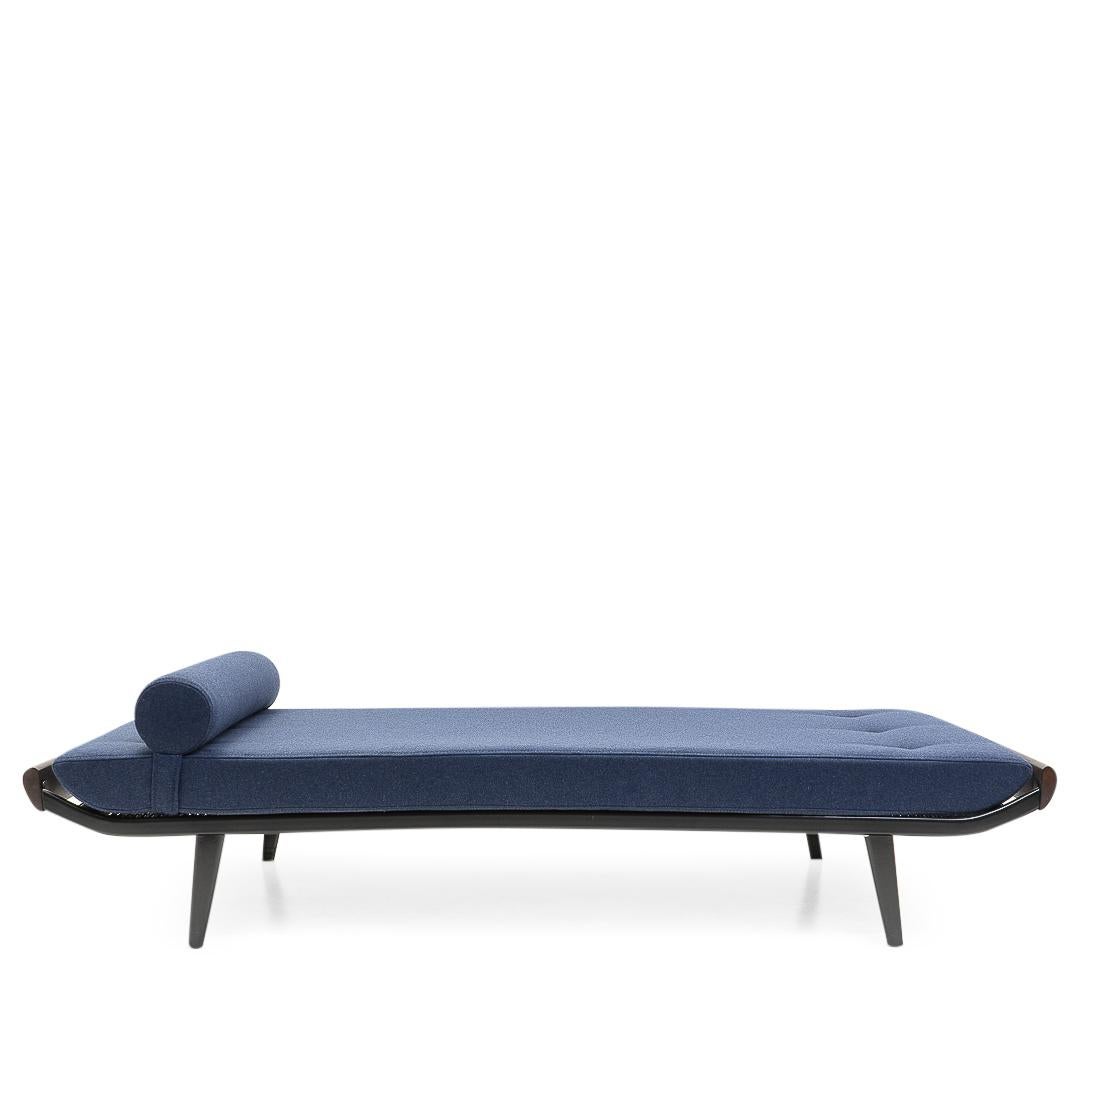 Vintage daybed designed by Dick Cordemijer for Auping (the Netherlands) during the 1950s.
New high-quality dark blue woolen upholstery and foam; the daybed can be used as both a sofa and spare bed. The cover features a zipper on both pillow and